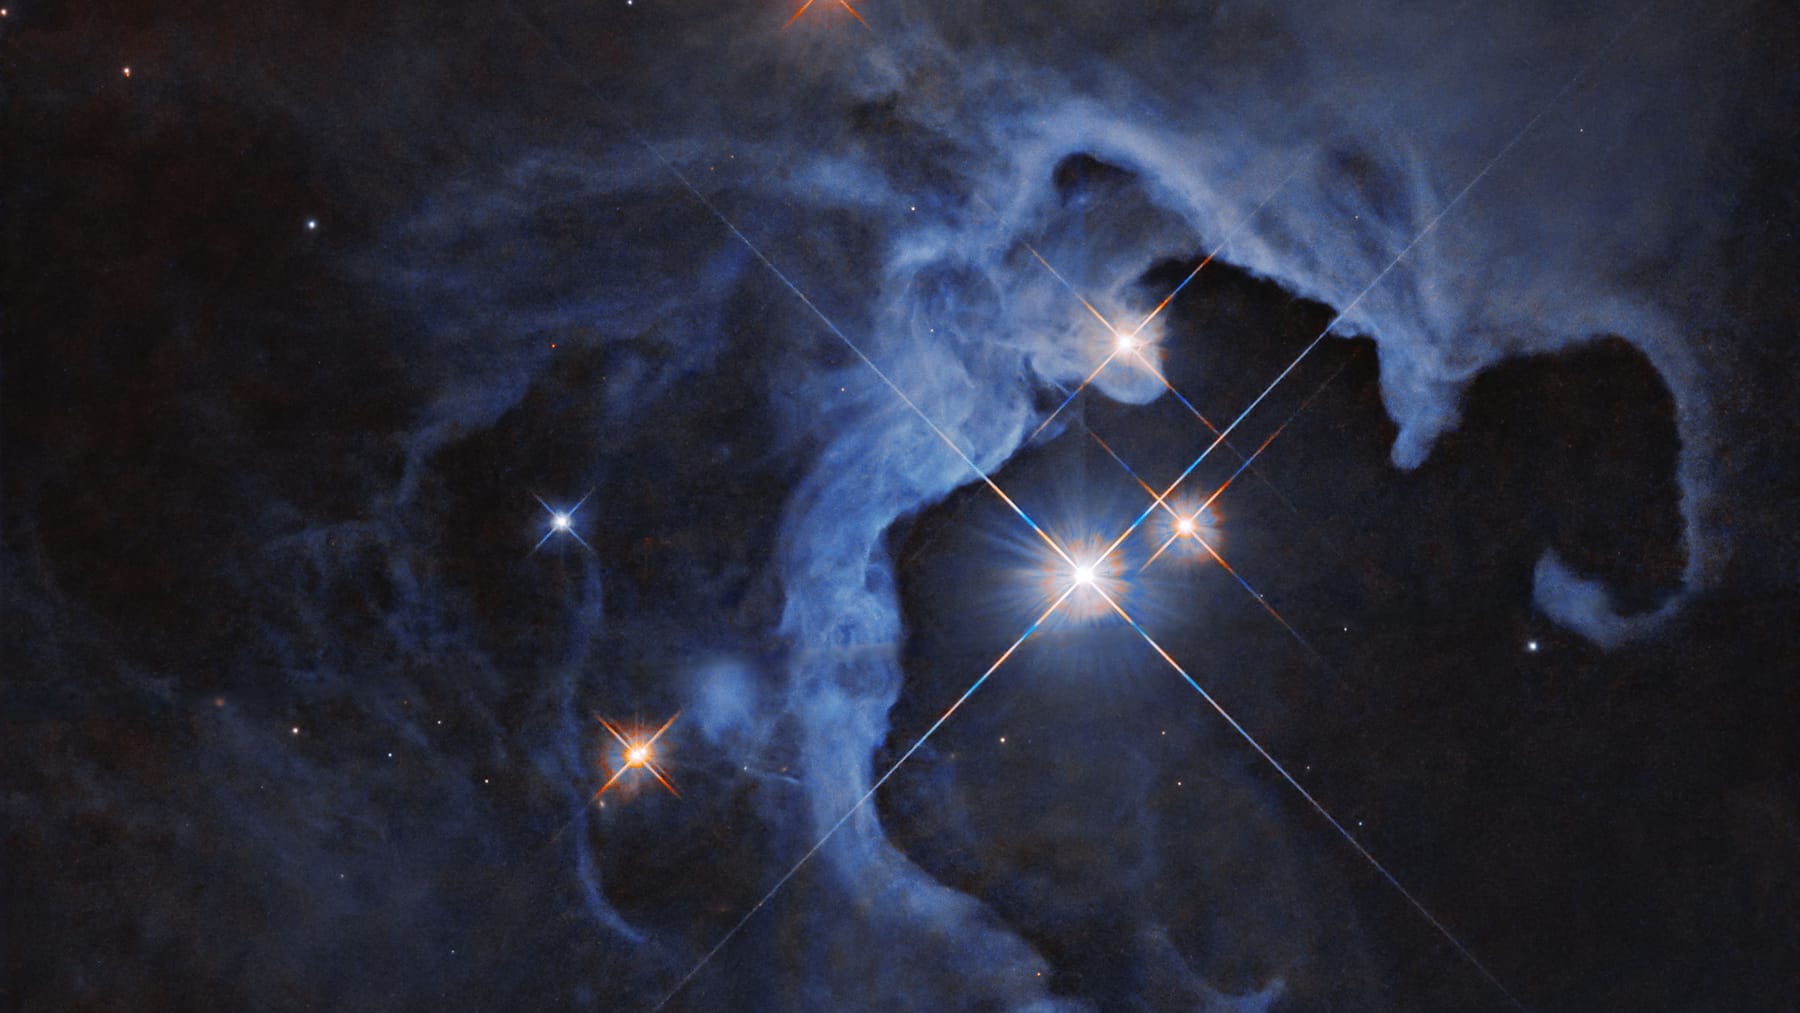 The Hubble Space Telescope images the star after it is born